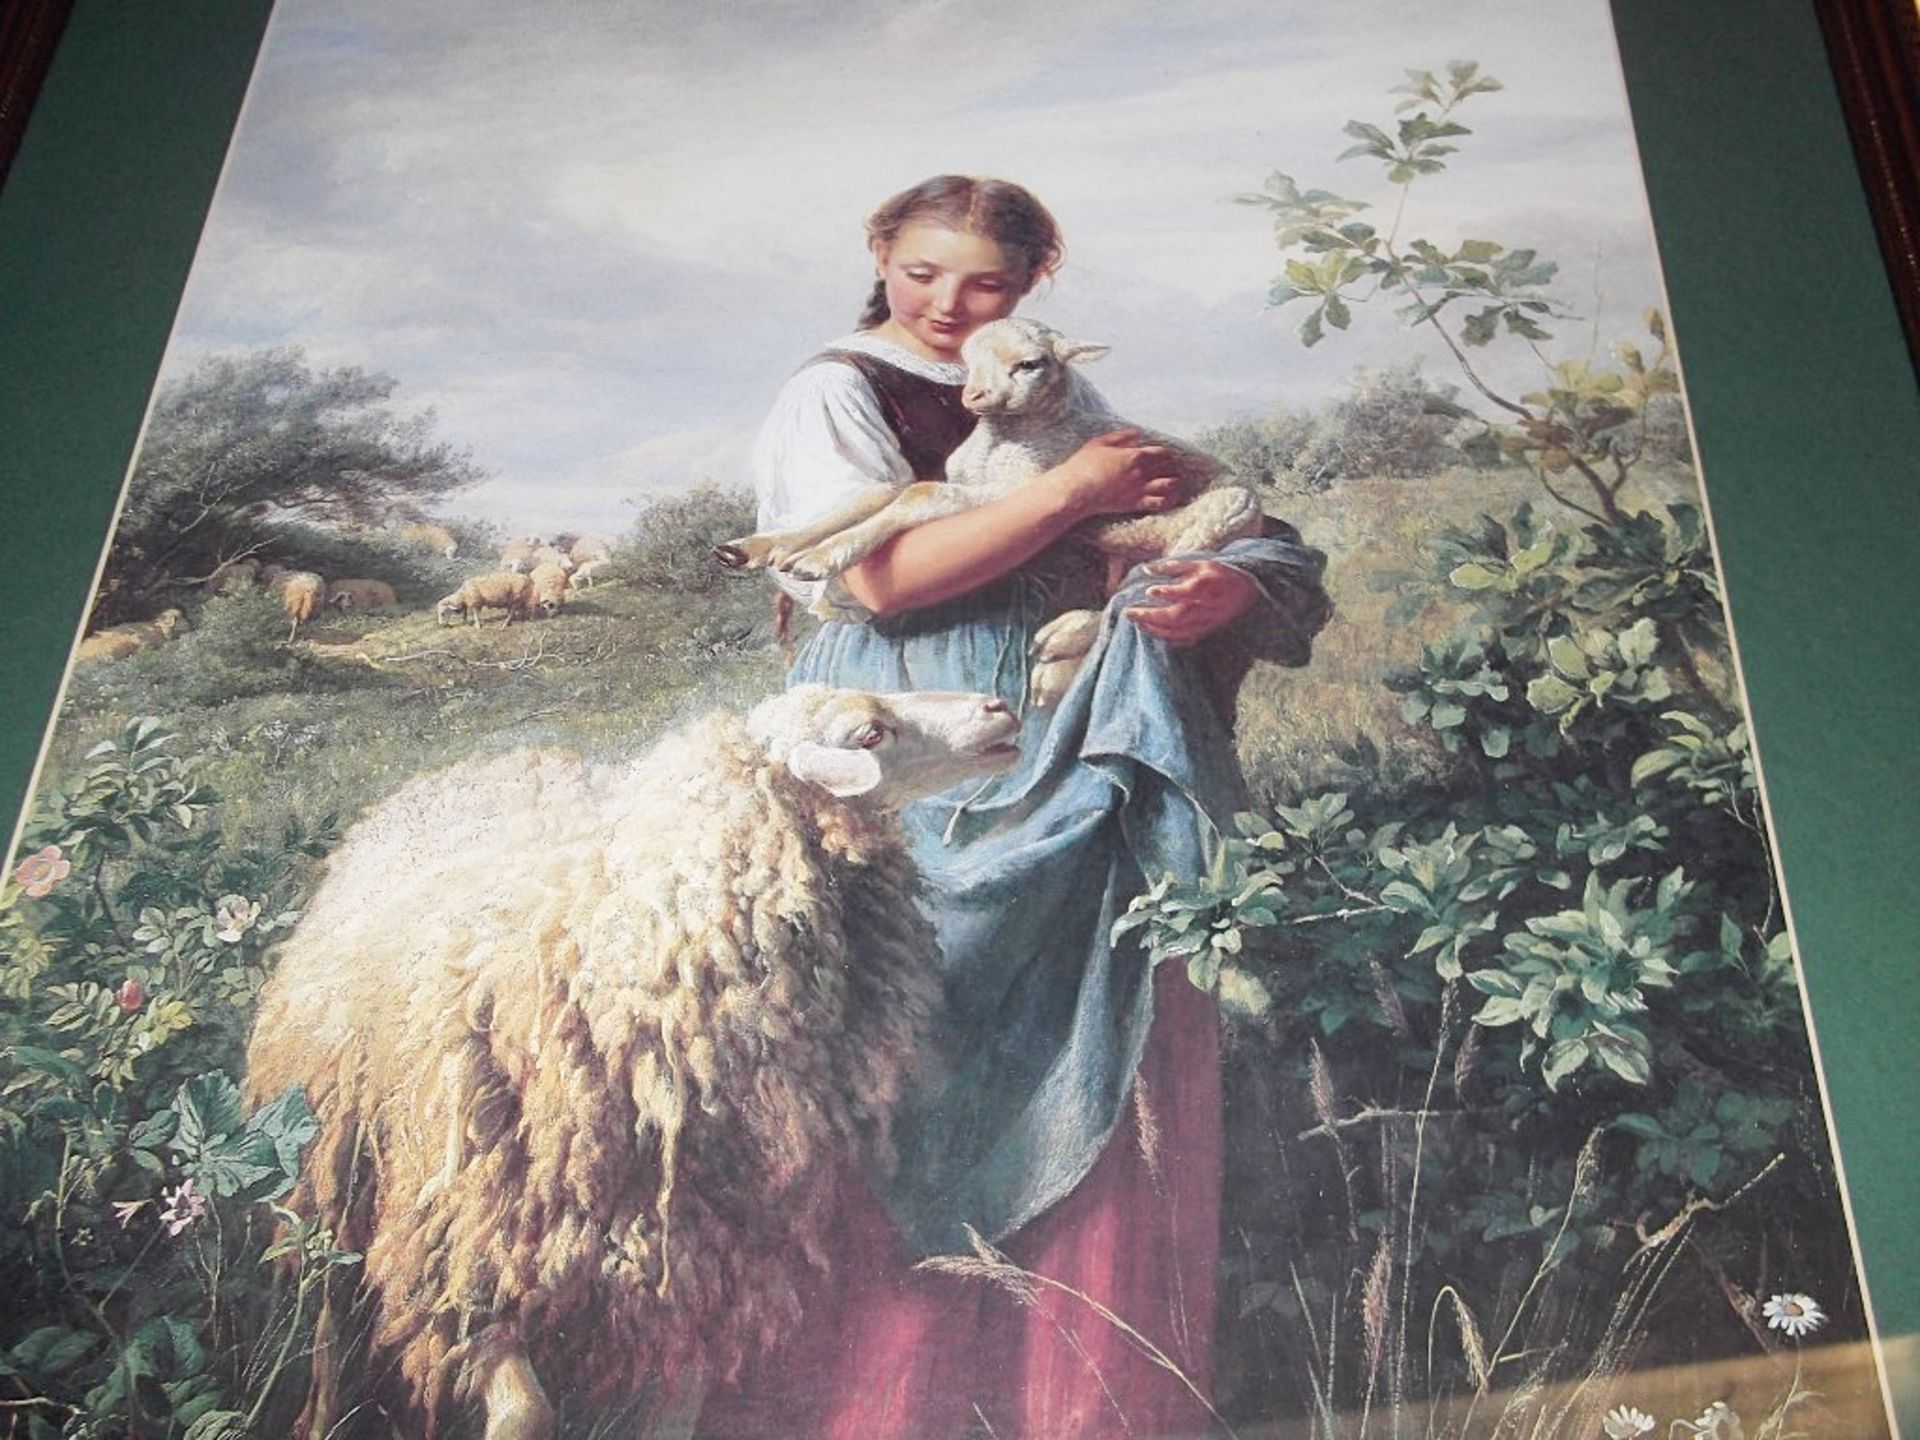 1 x Framed Art Print - The Shepherdess, 1866, Hofner - Pre-owned In Lovely Condition - Dimensions: - Image 2 of 3